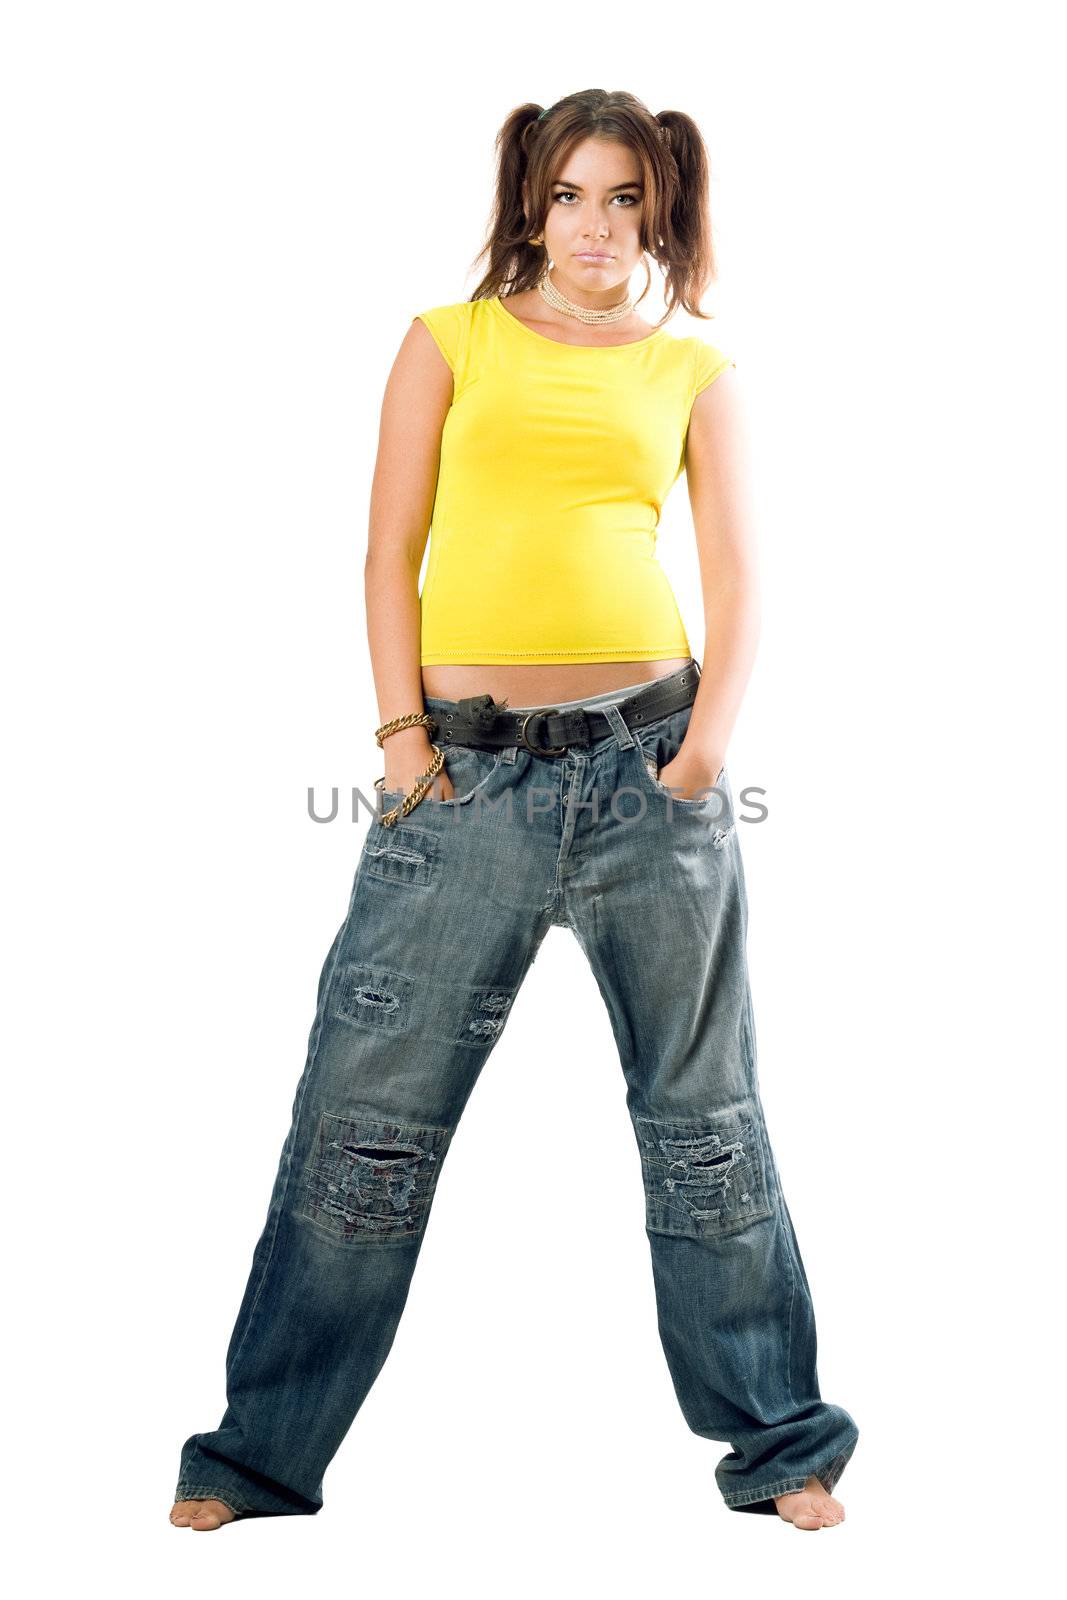 Young rapper girl in wide jeans and yellow top. Isolated